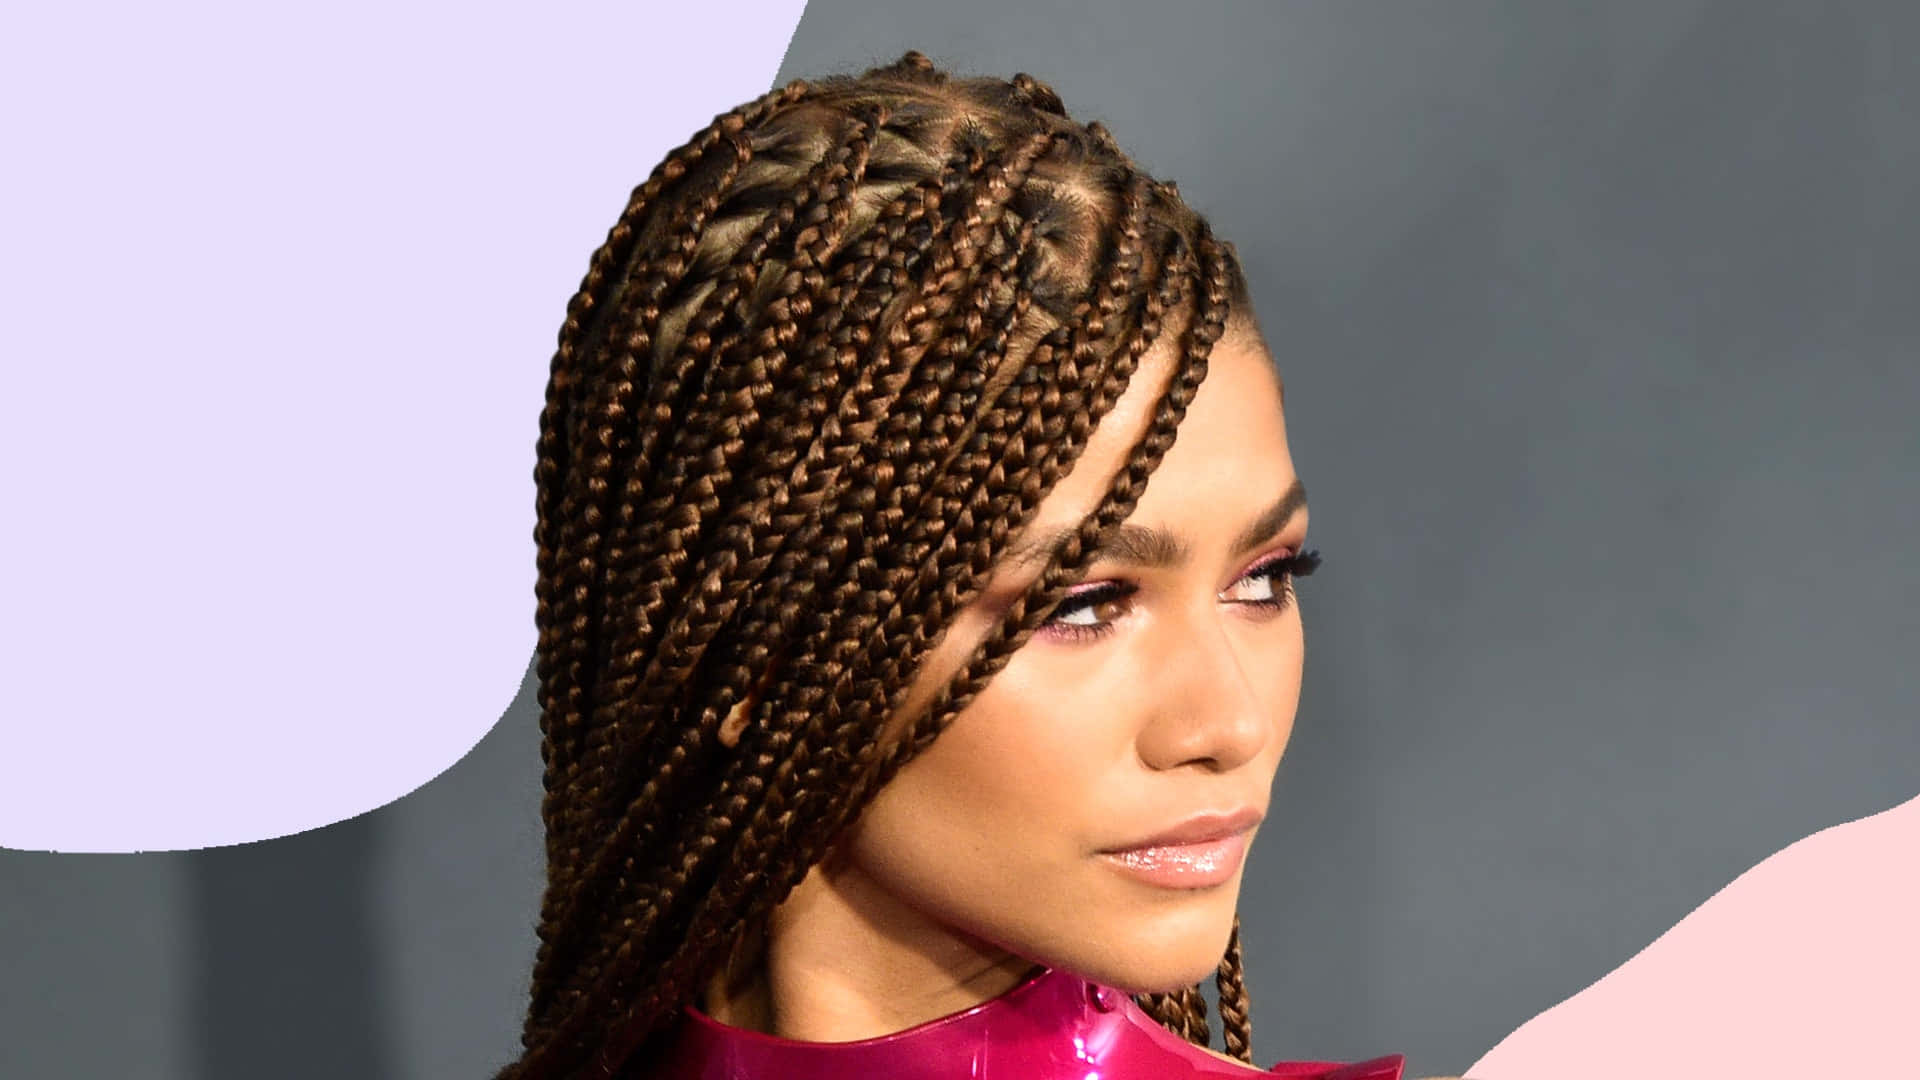 Download A Woman With Braids In Pink Dress | Wallpapers.com